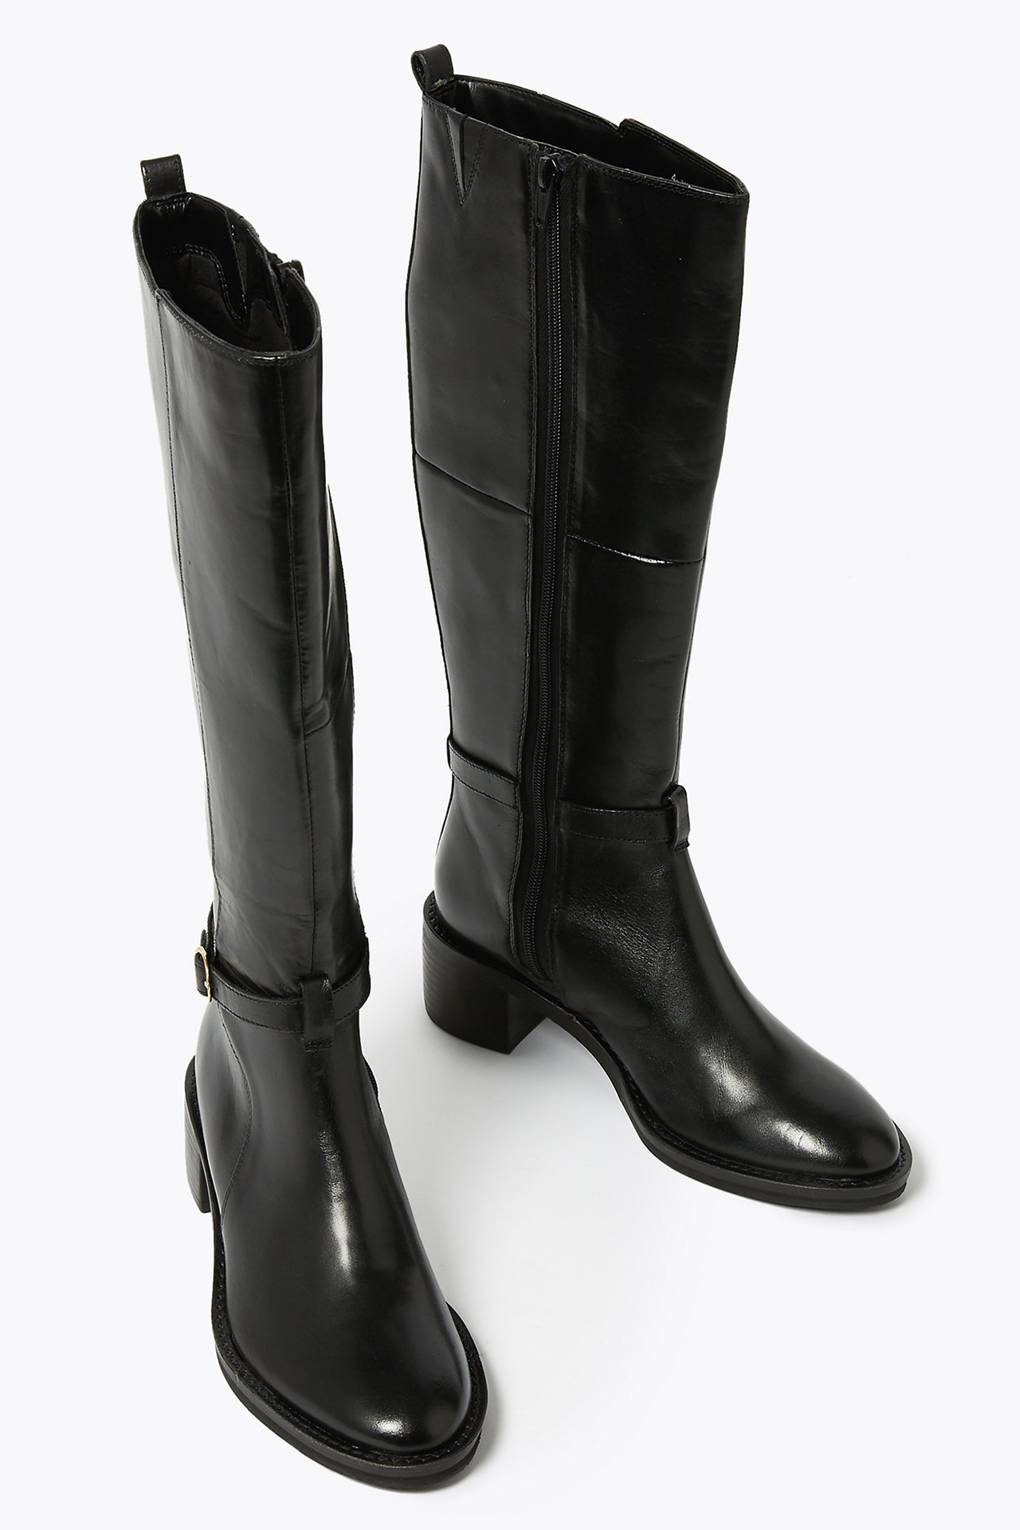 M&S Cannot Keep These Boots In Stock | Glamour UK